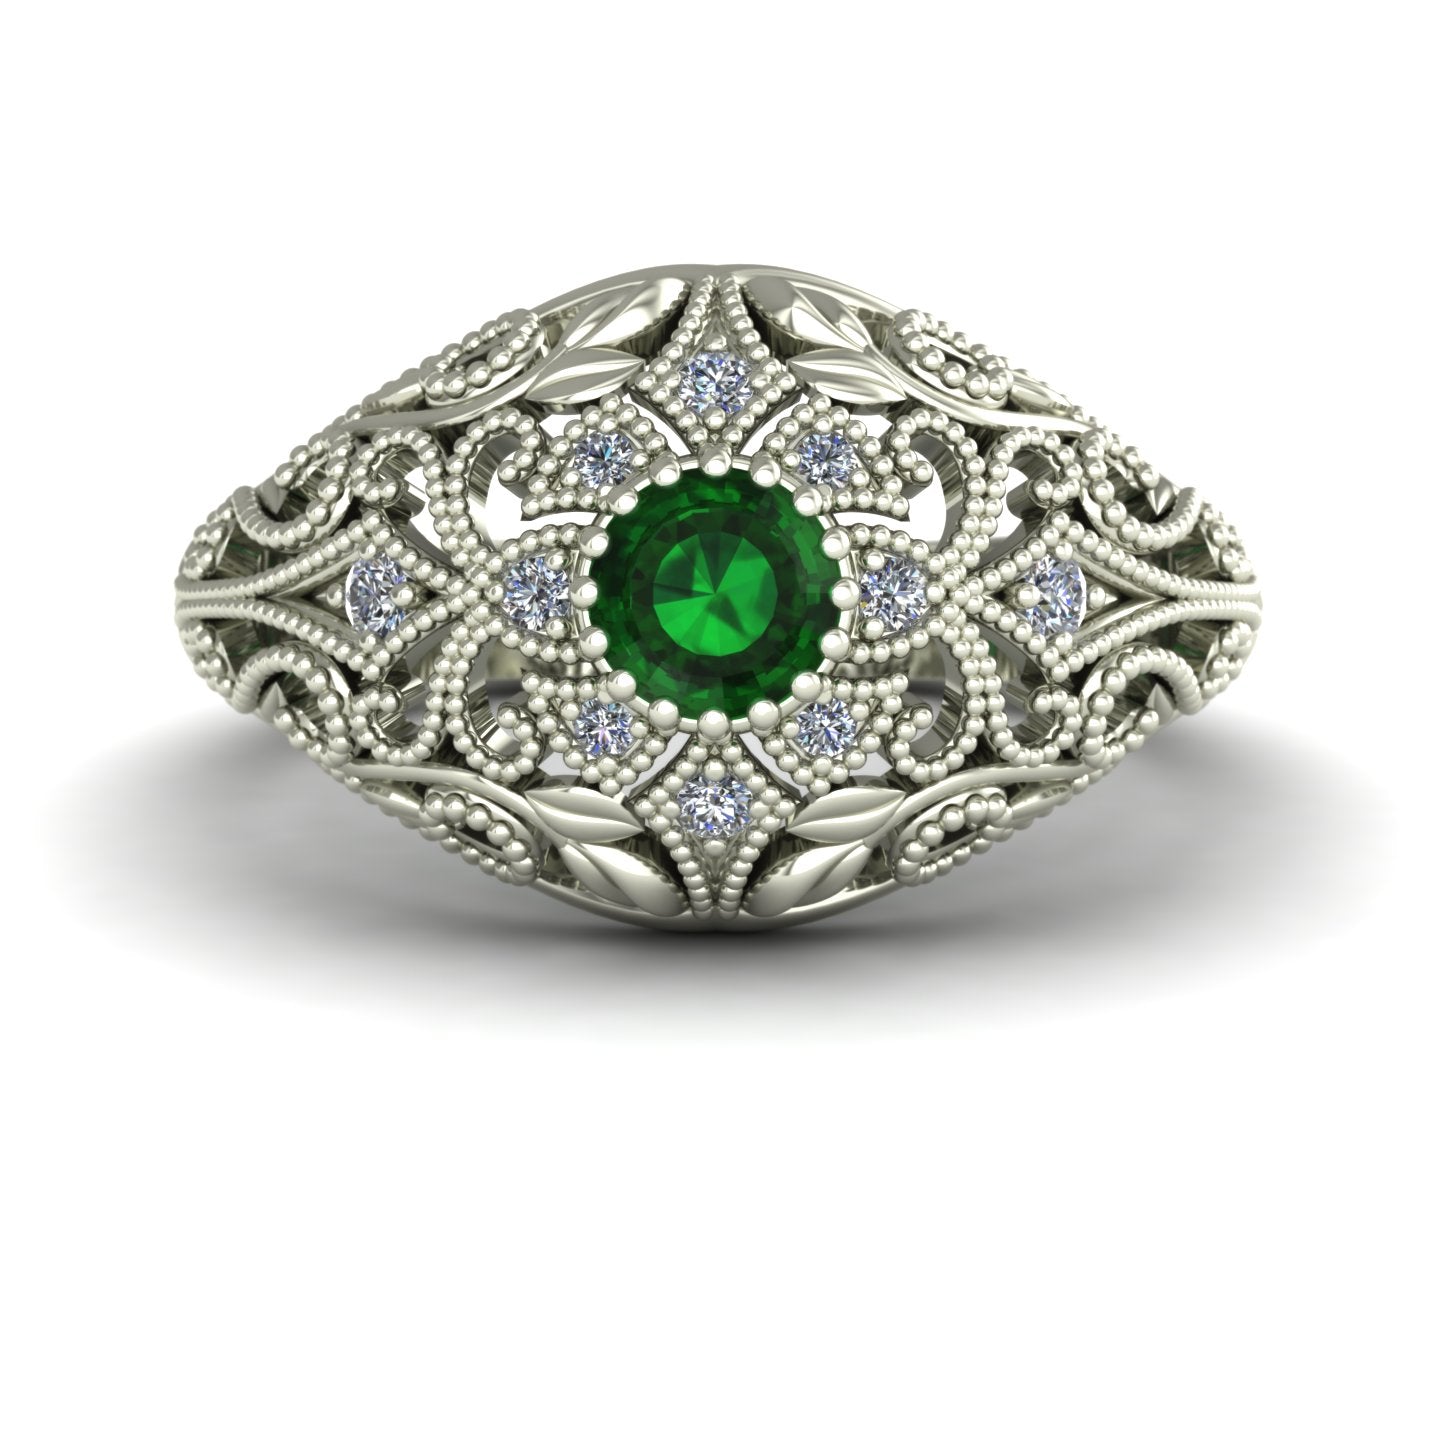 Emerald and diamond dome ring with leaves and vines in 14k white gold - Charles Babb Designs - top view